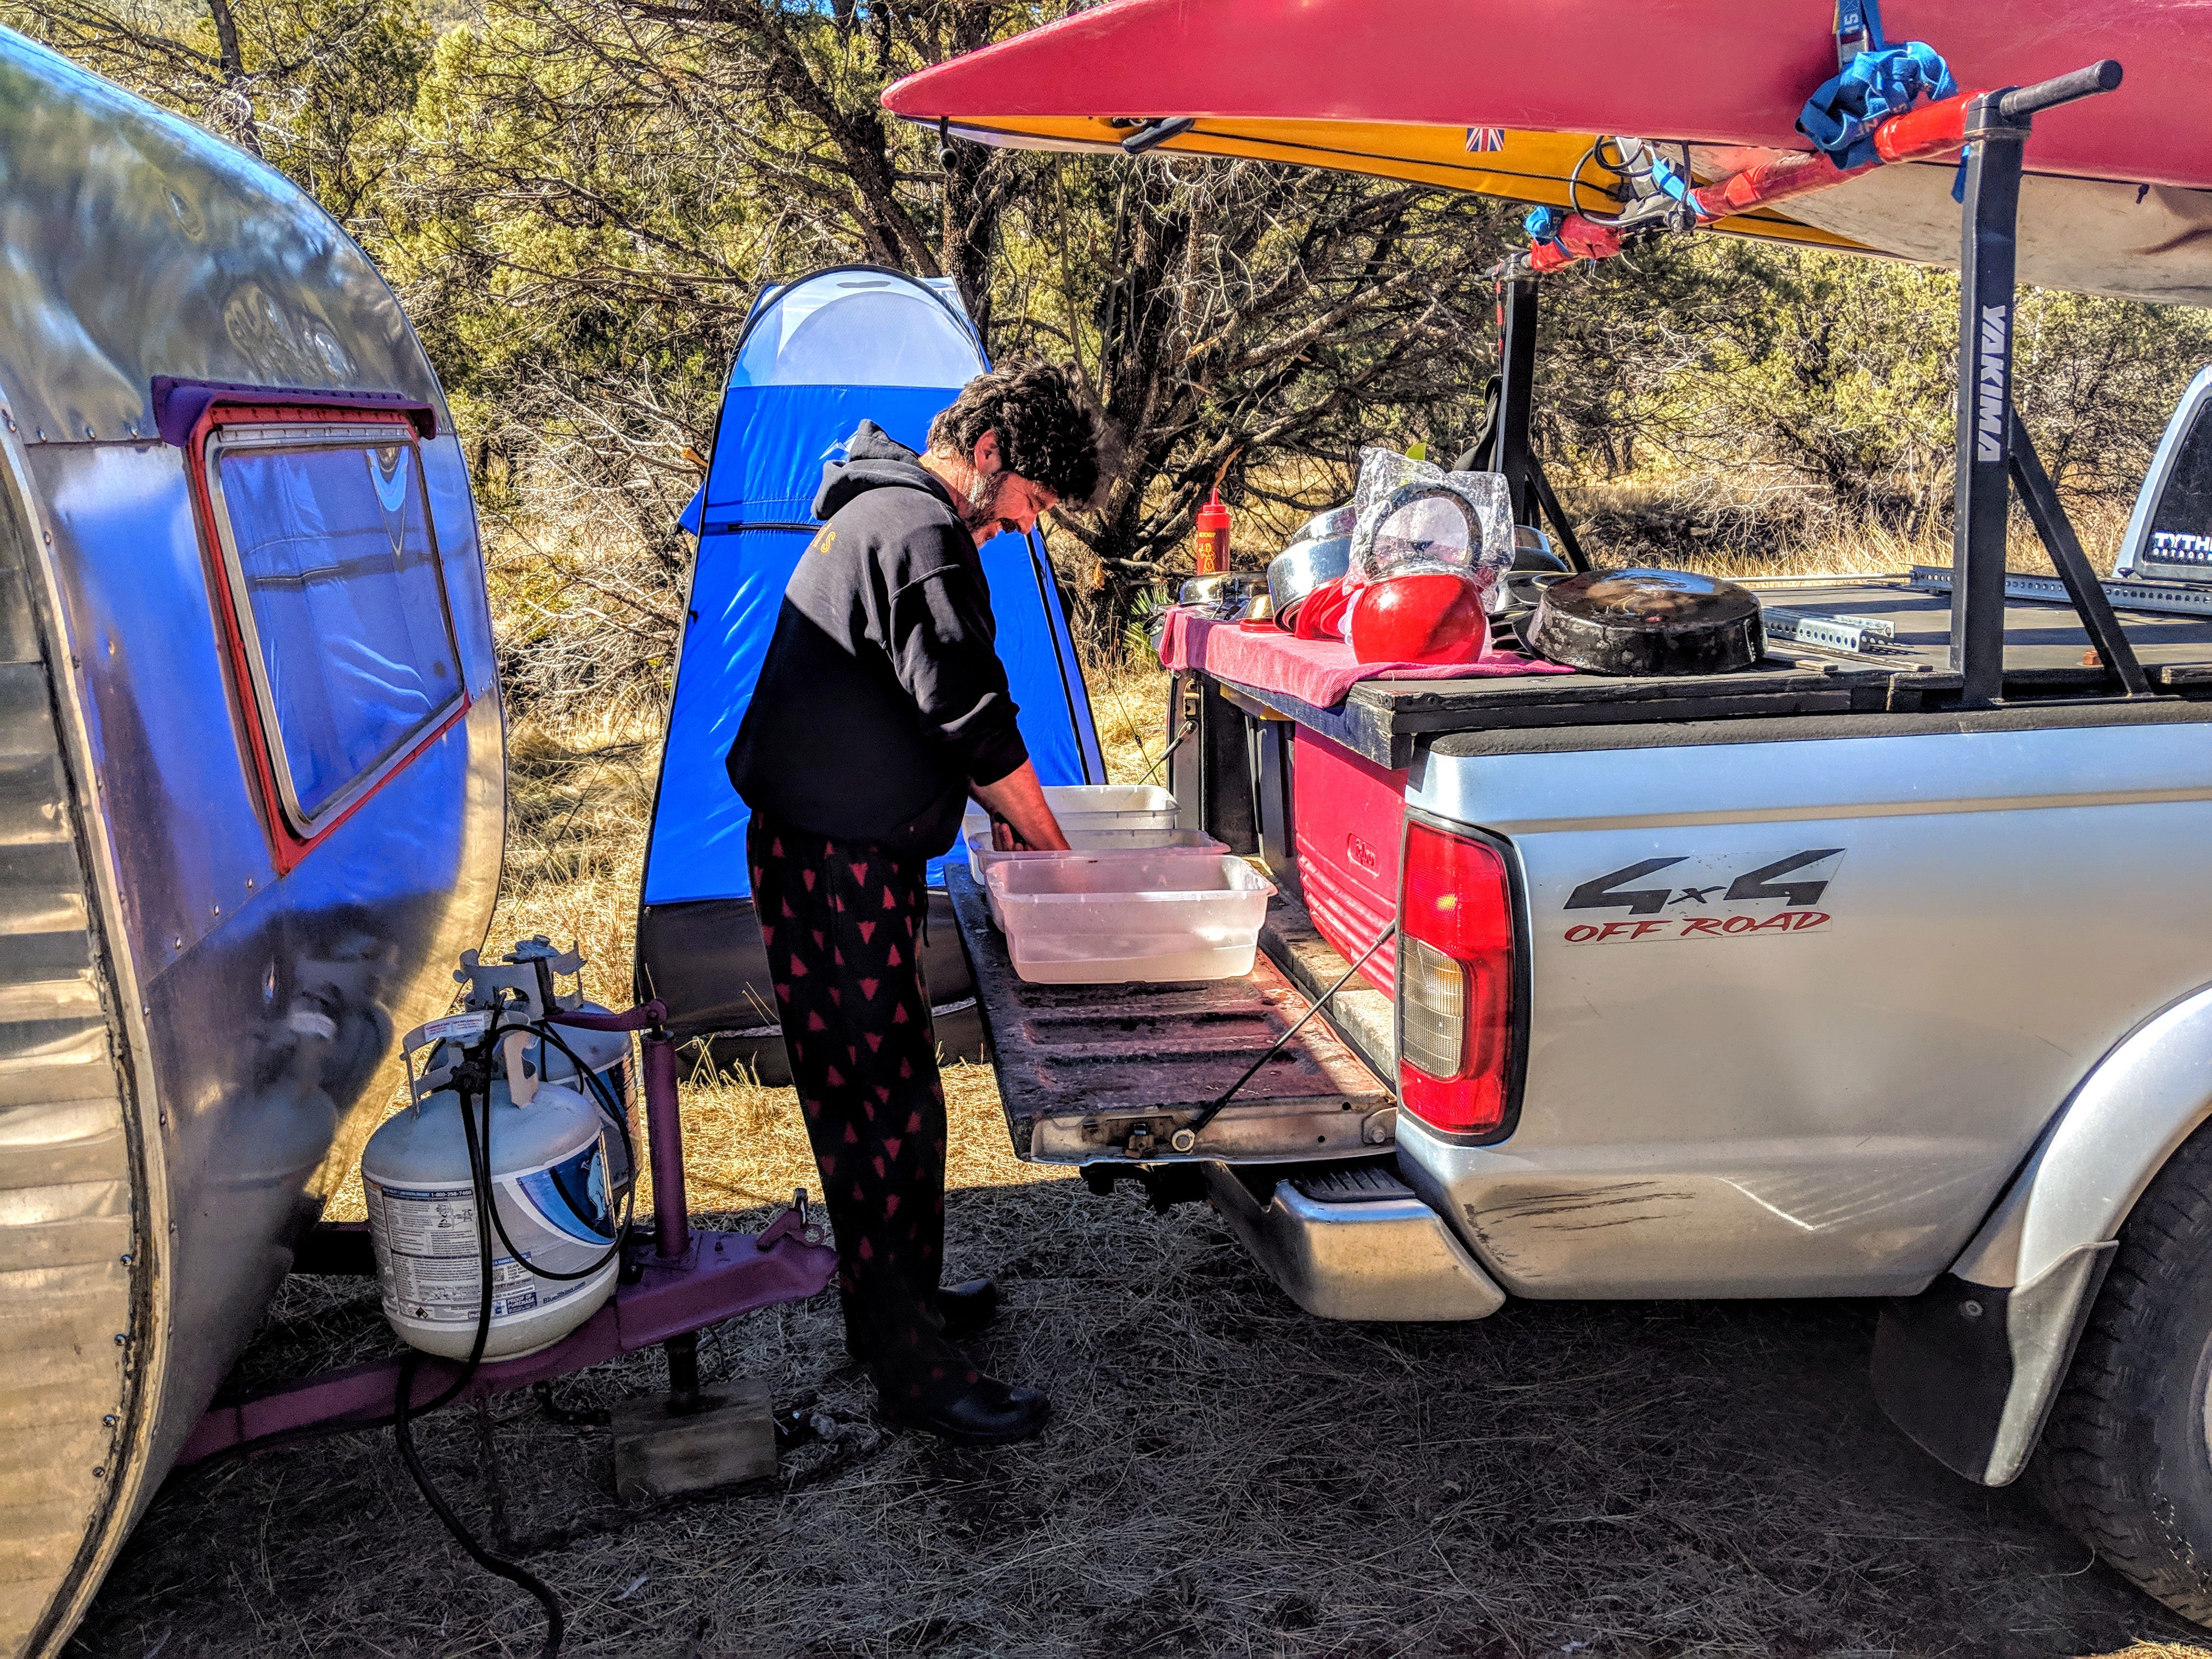 Camper submitted image from Pinery Canyon Road Dispersed Camping - Coronado National Forest - 5